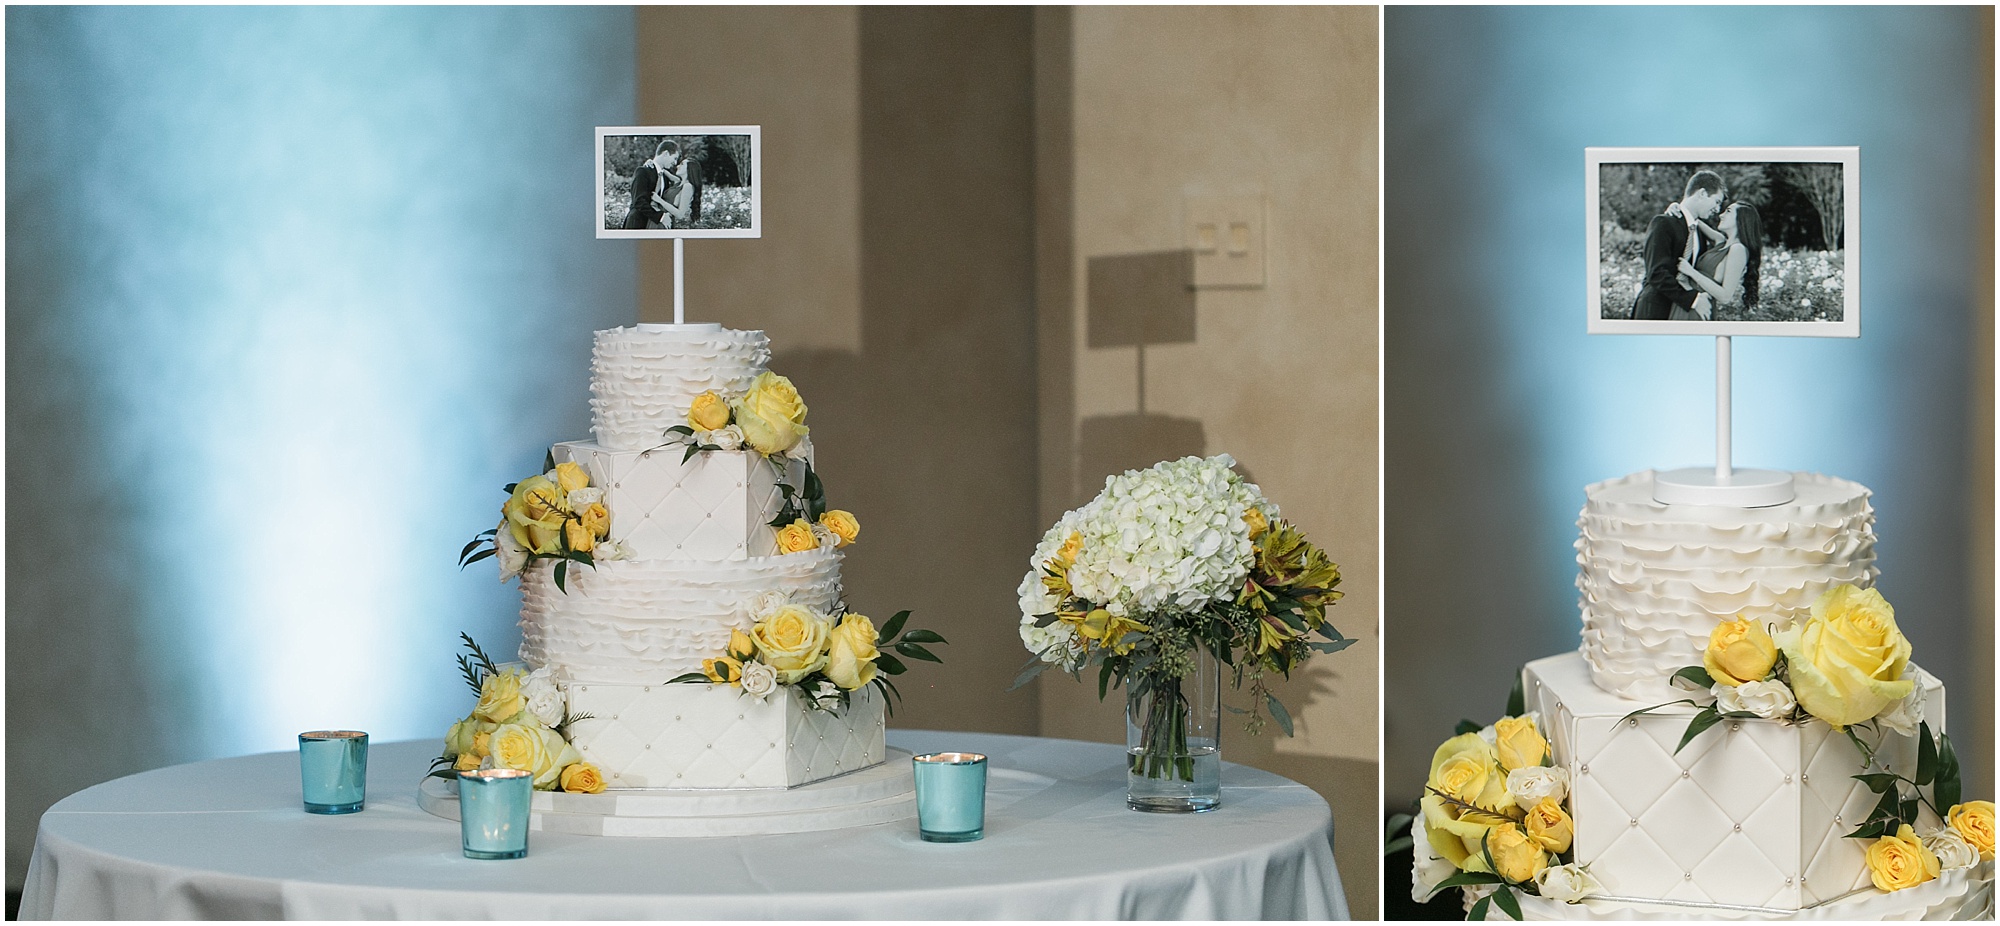 White wedding cake decorated with yellow flowers. 